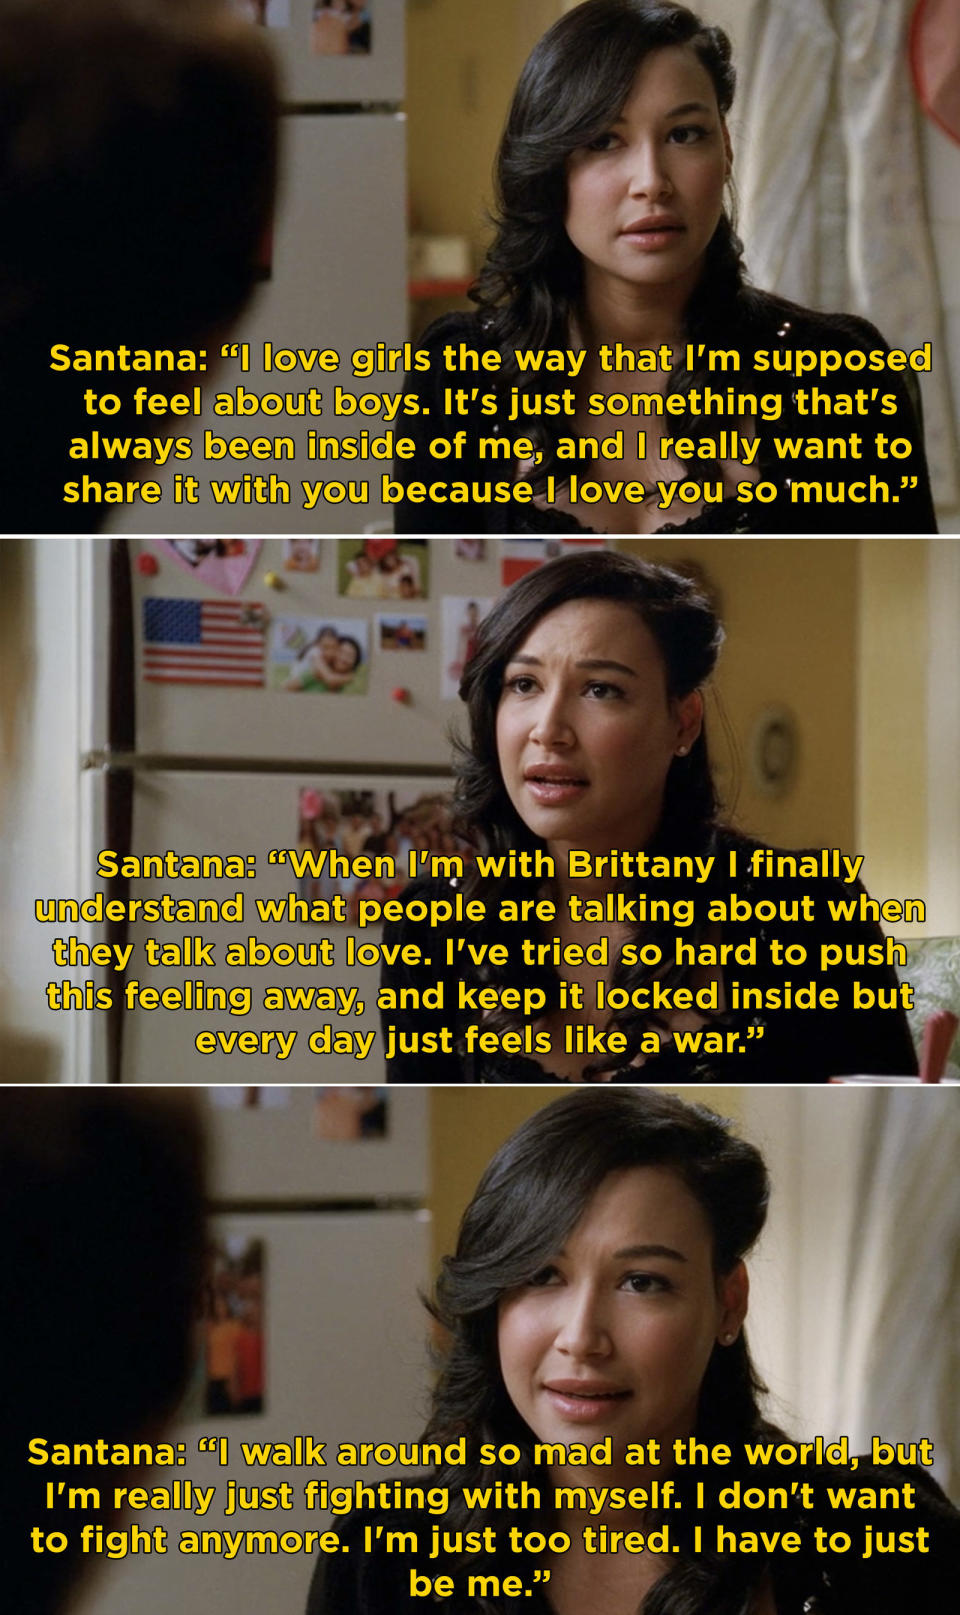 Santana tells her grandmother she "loves girls the way she's supposed to feel about boys" and that she has to stop fighting with the world and just be herself